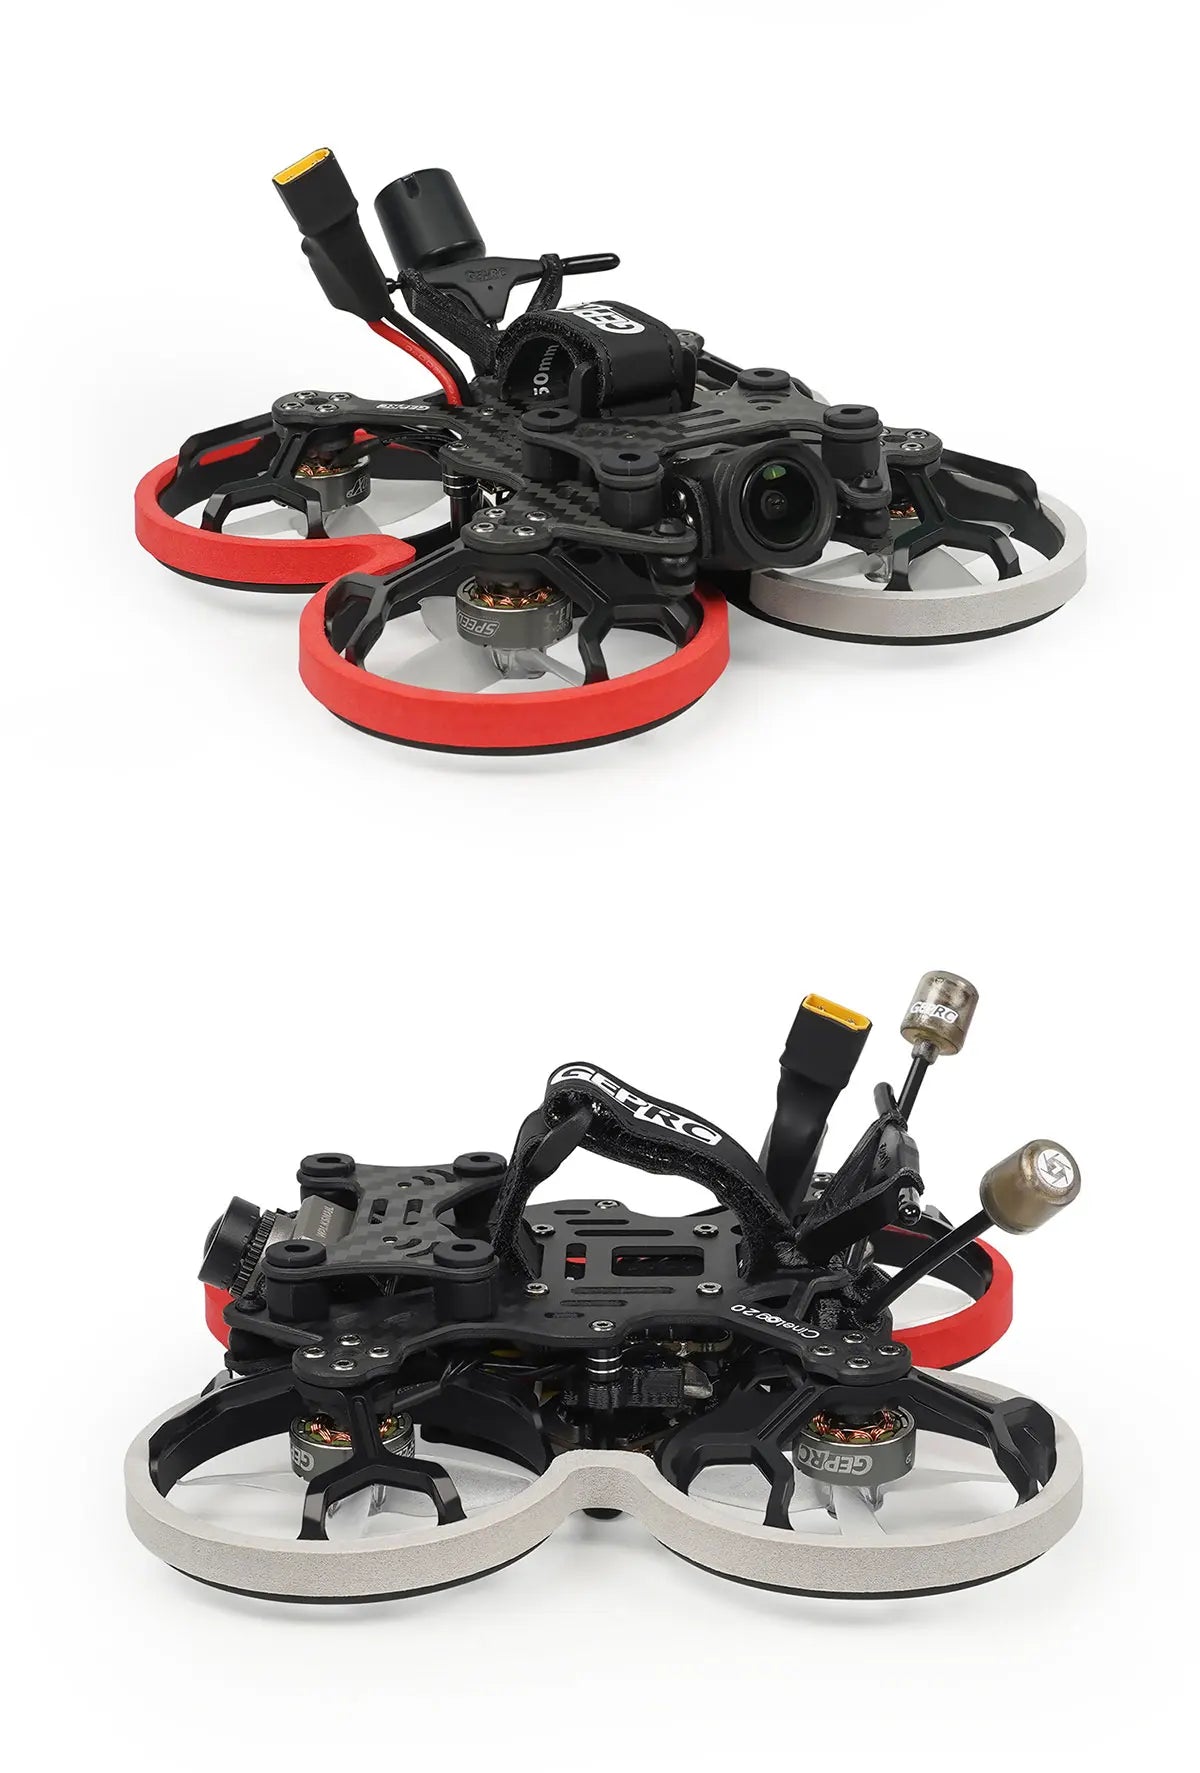 GEPRC Cinelog20 HD, mount a shock-absorbing gimbal under the independent FPV camera .